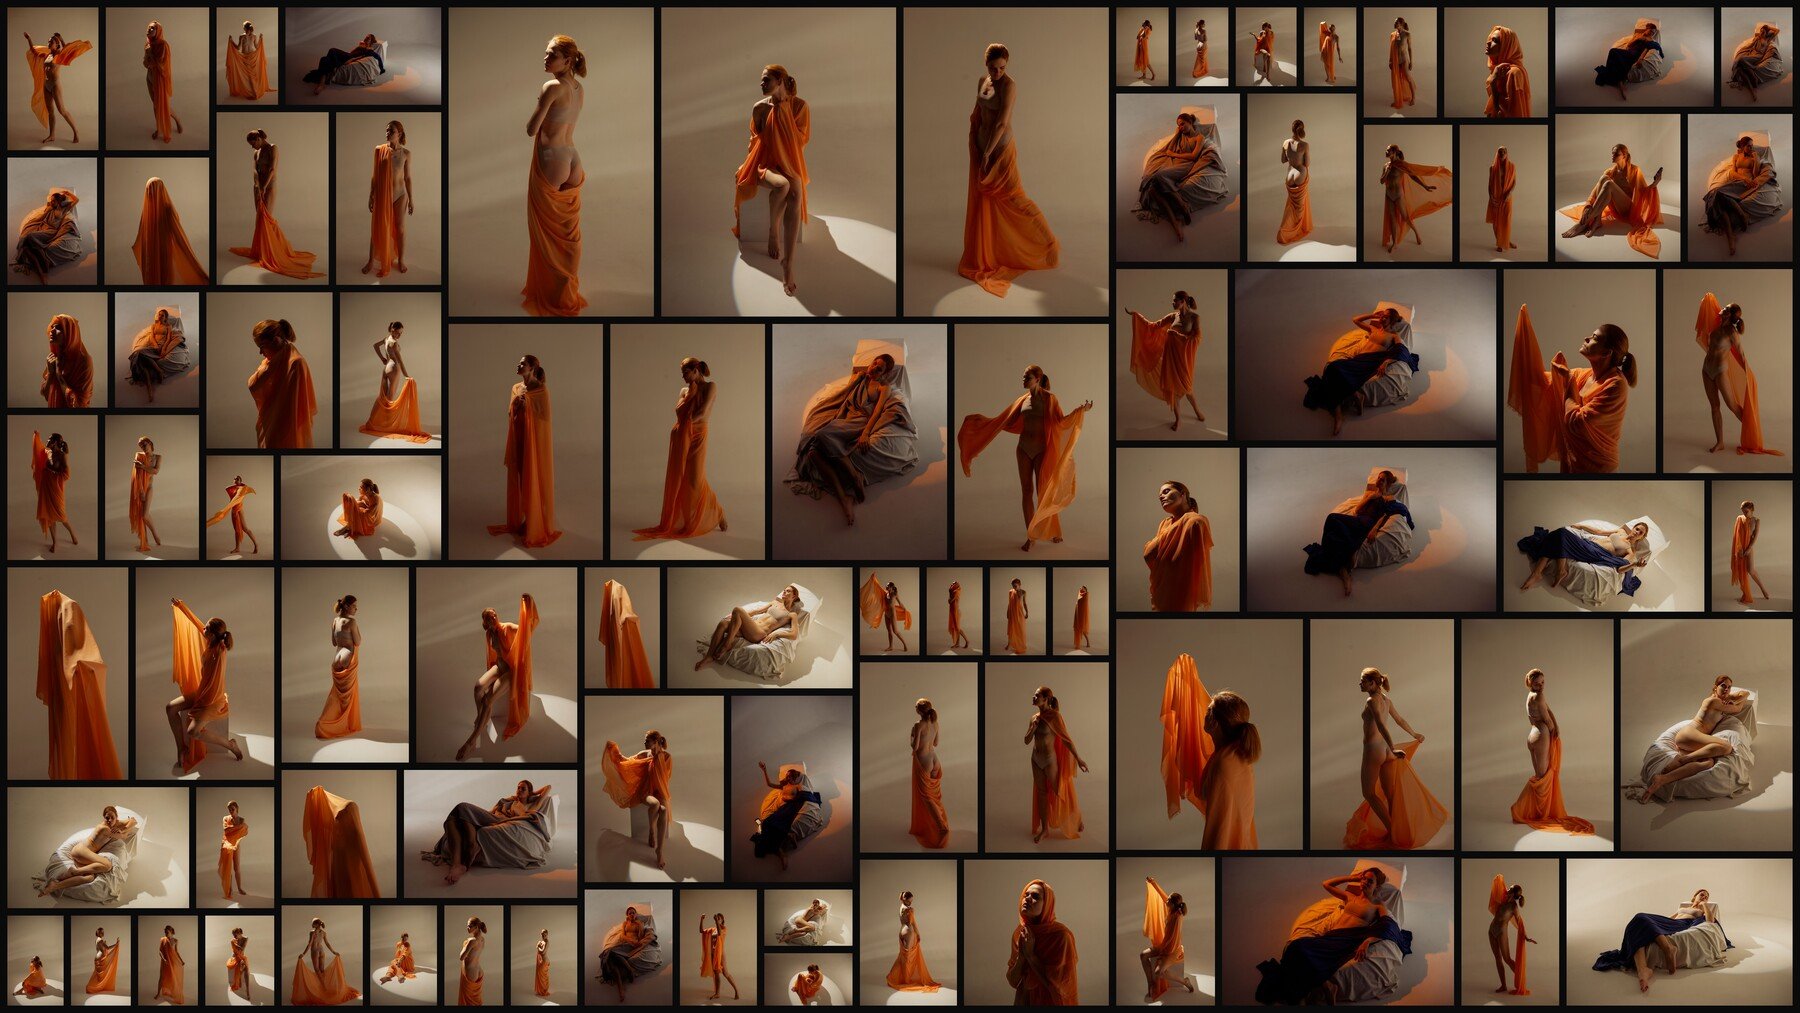 290+ Different Fabrics And Dramatic Lighting / Reference Images